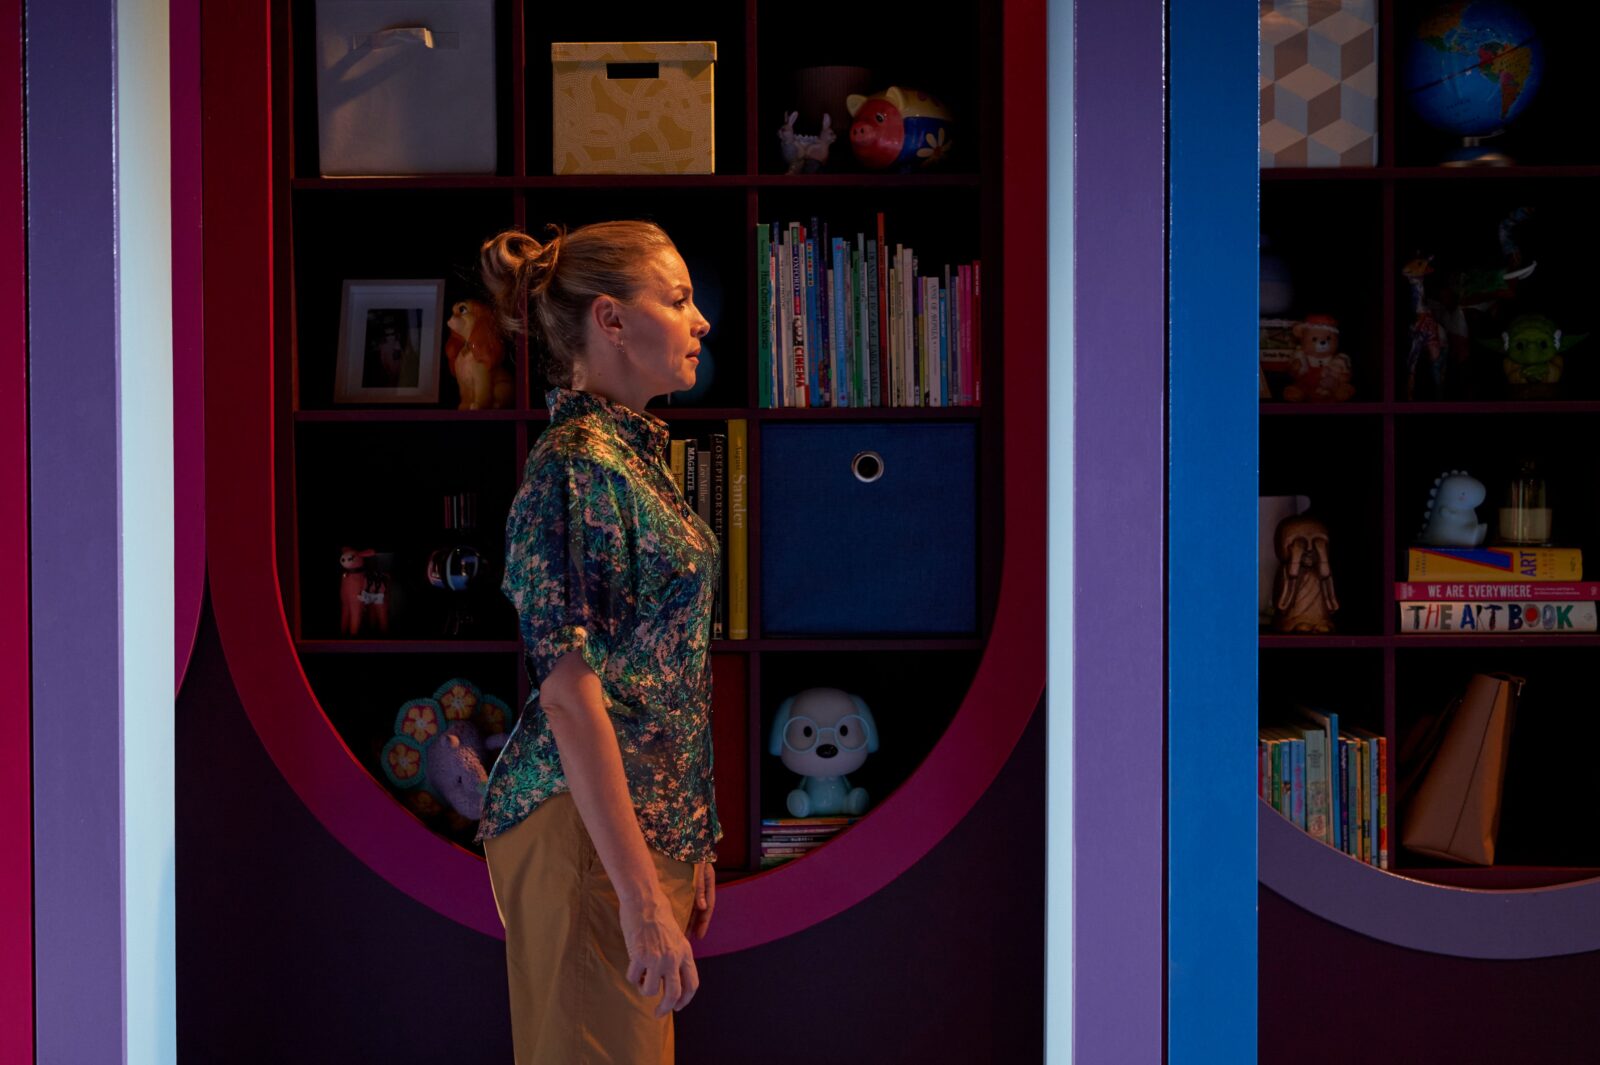 A blonde woman stands side-on to camera. Beside her a bookshelf filled with toys, books & photos